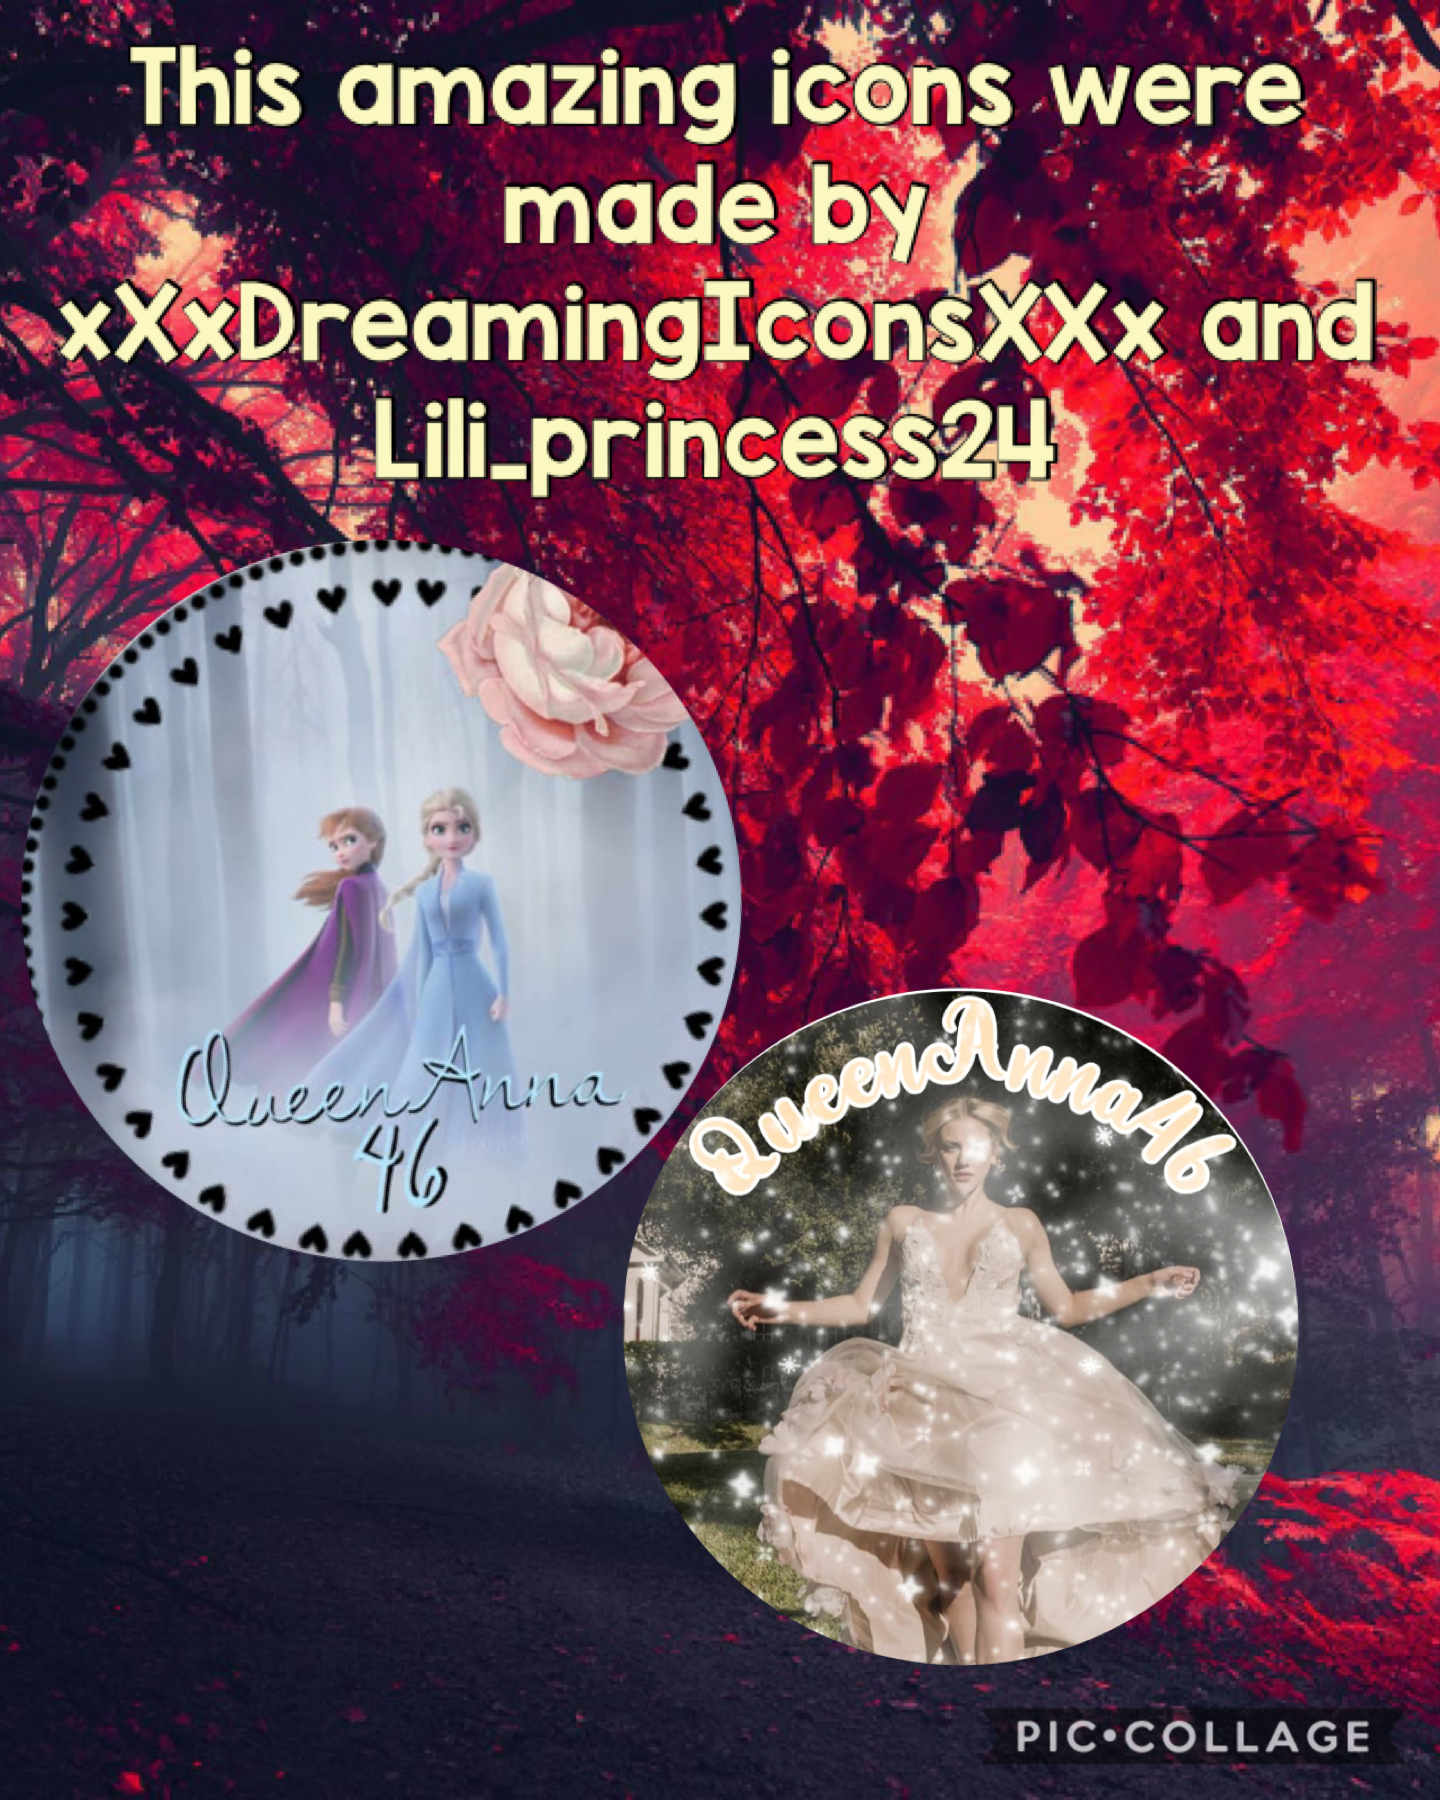 These amazing icons were made by xXxDreamingIconsXXx and Lili_princess24
